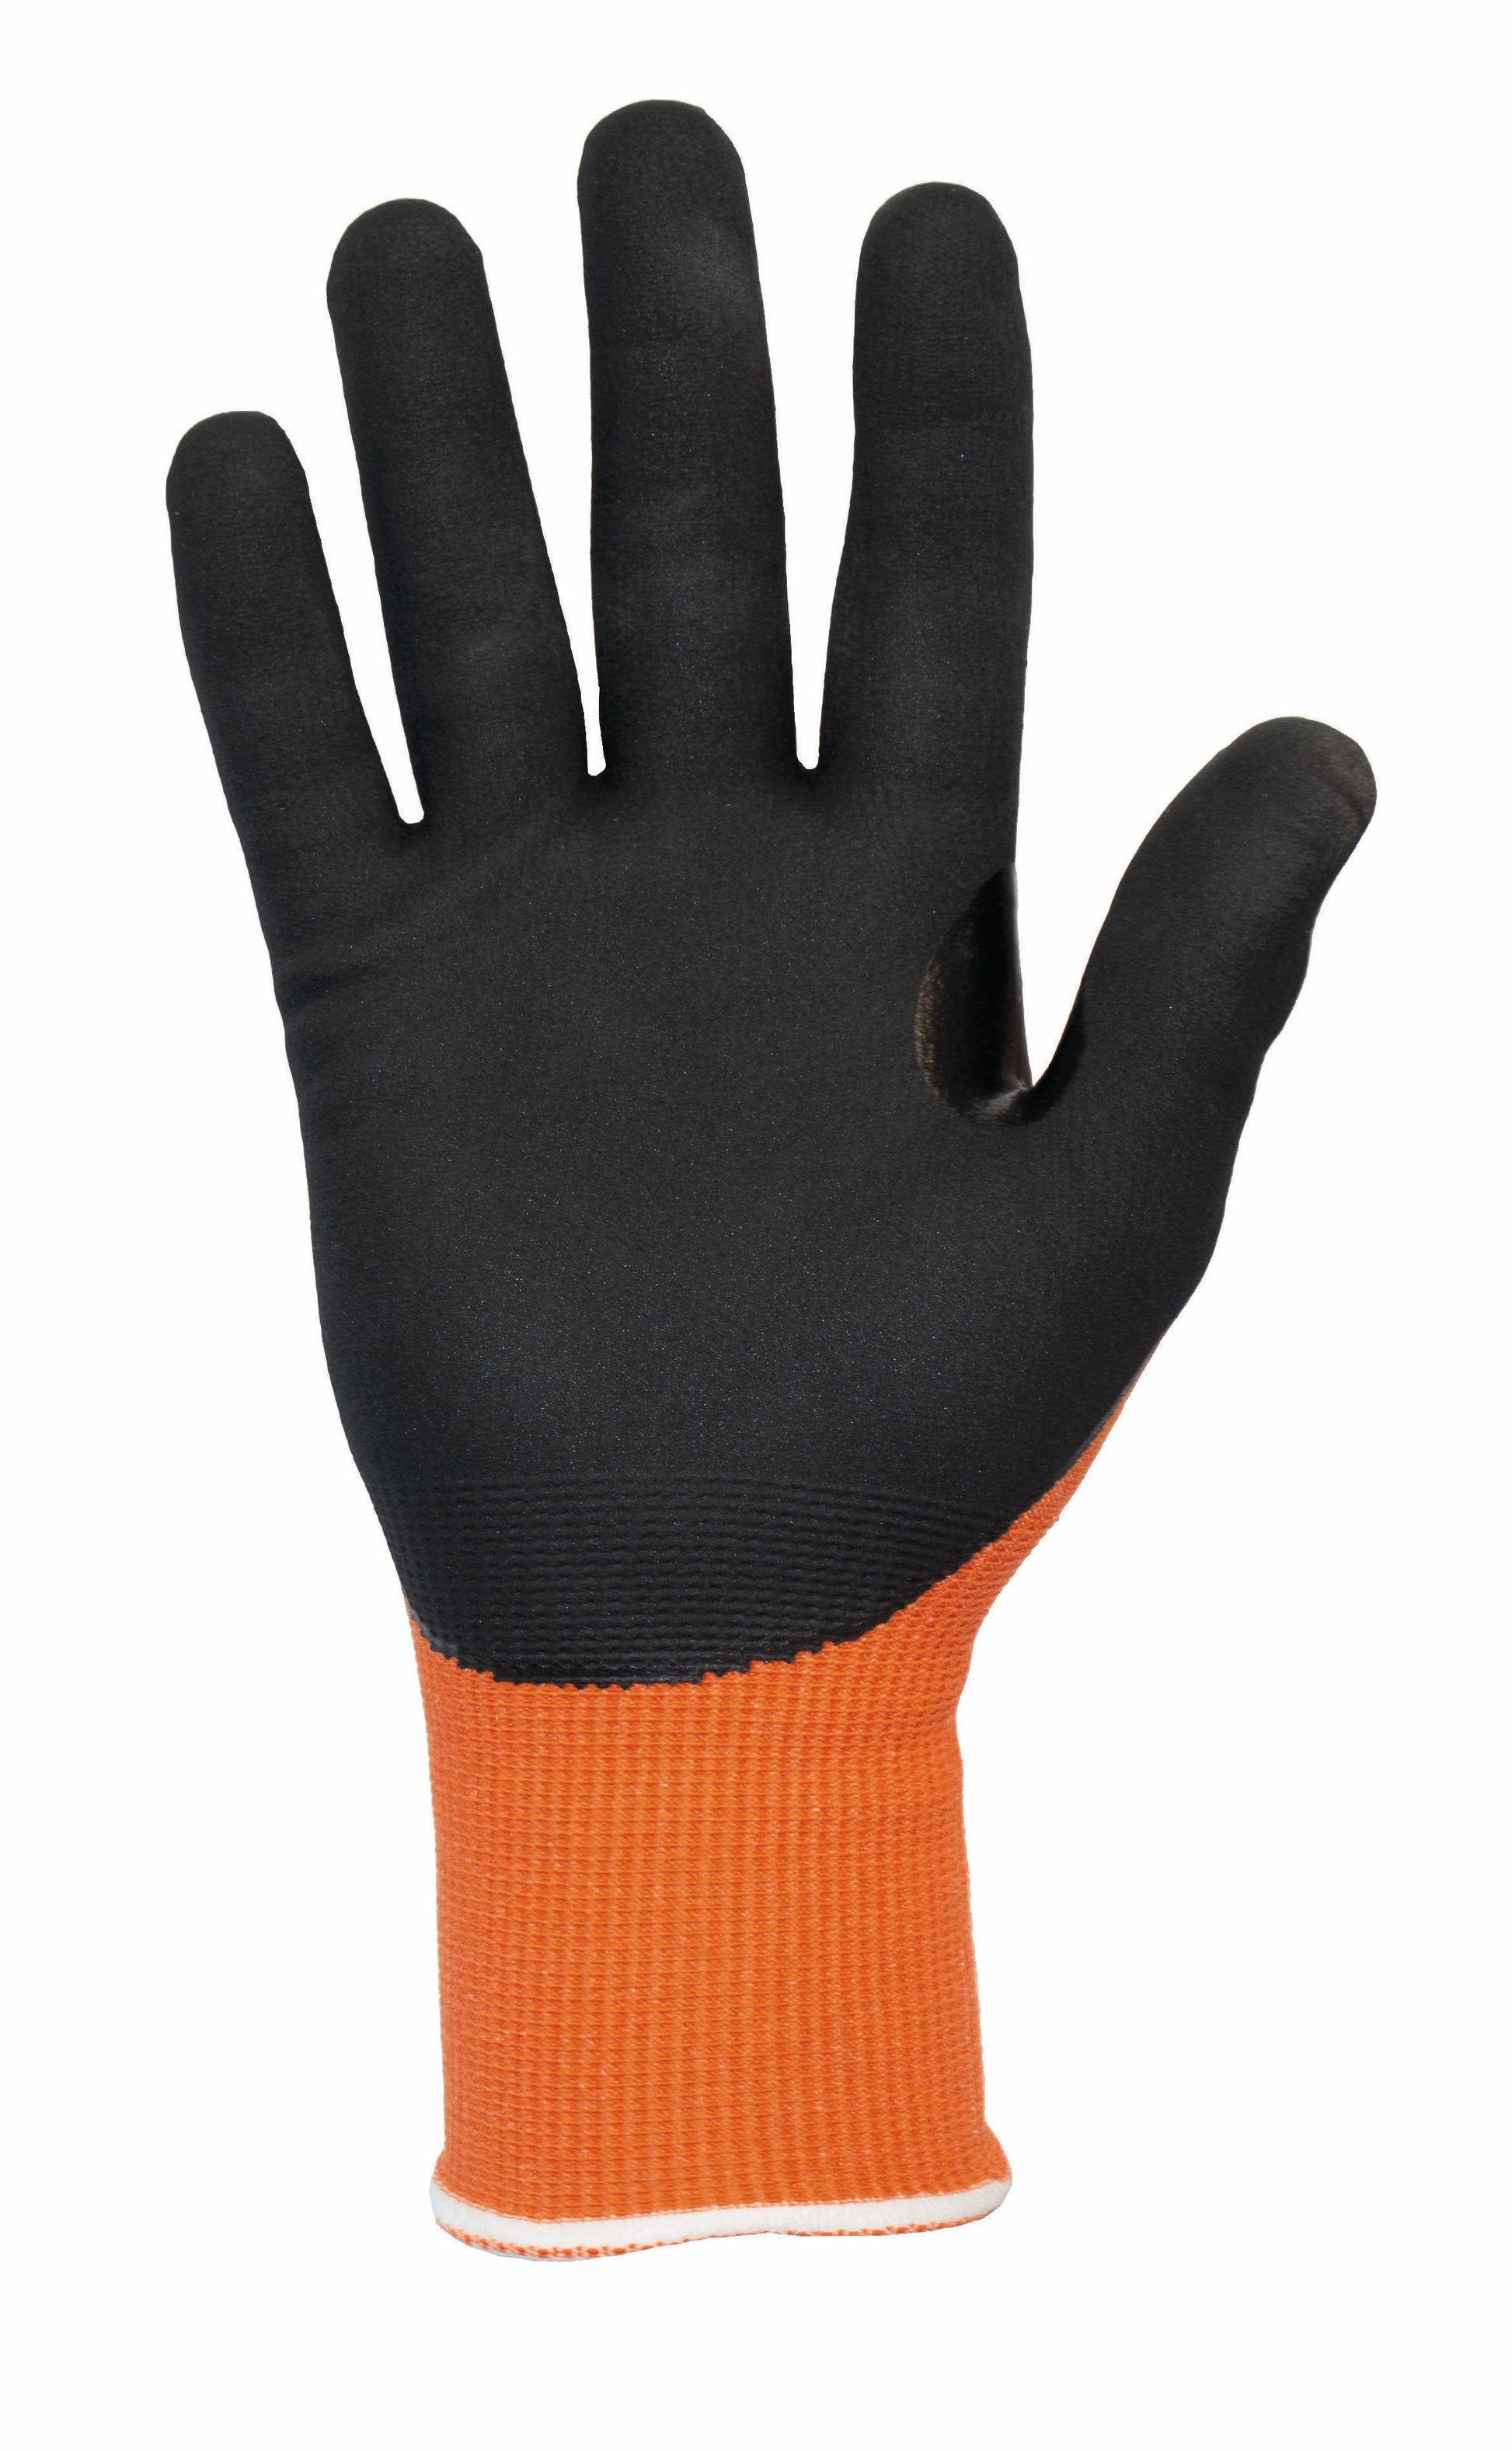 This Eco-friendly Traffi®TG3240 MicroDex LXT® Nitrile Coated Orange 15-gauge Cut Level A2 Safety Gloves are Carbon Neutral Certified, repels water and oil while providing hot contact resistance.